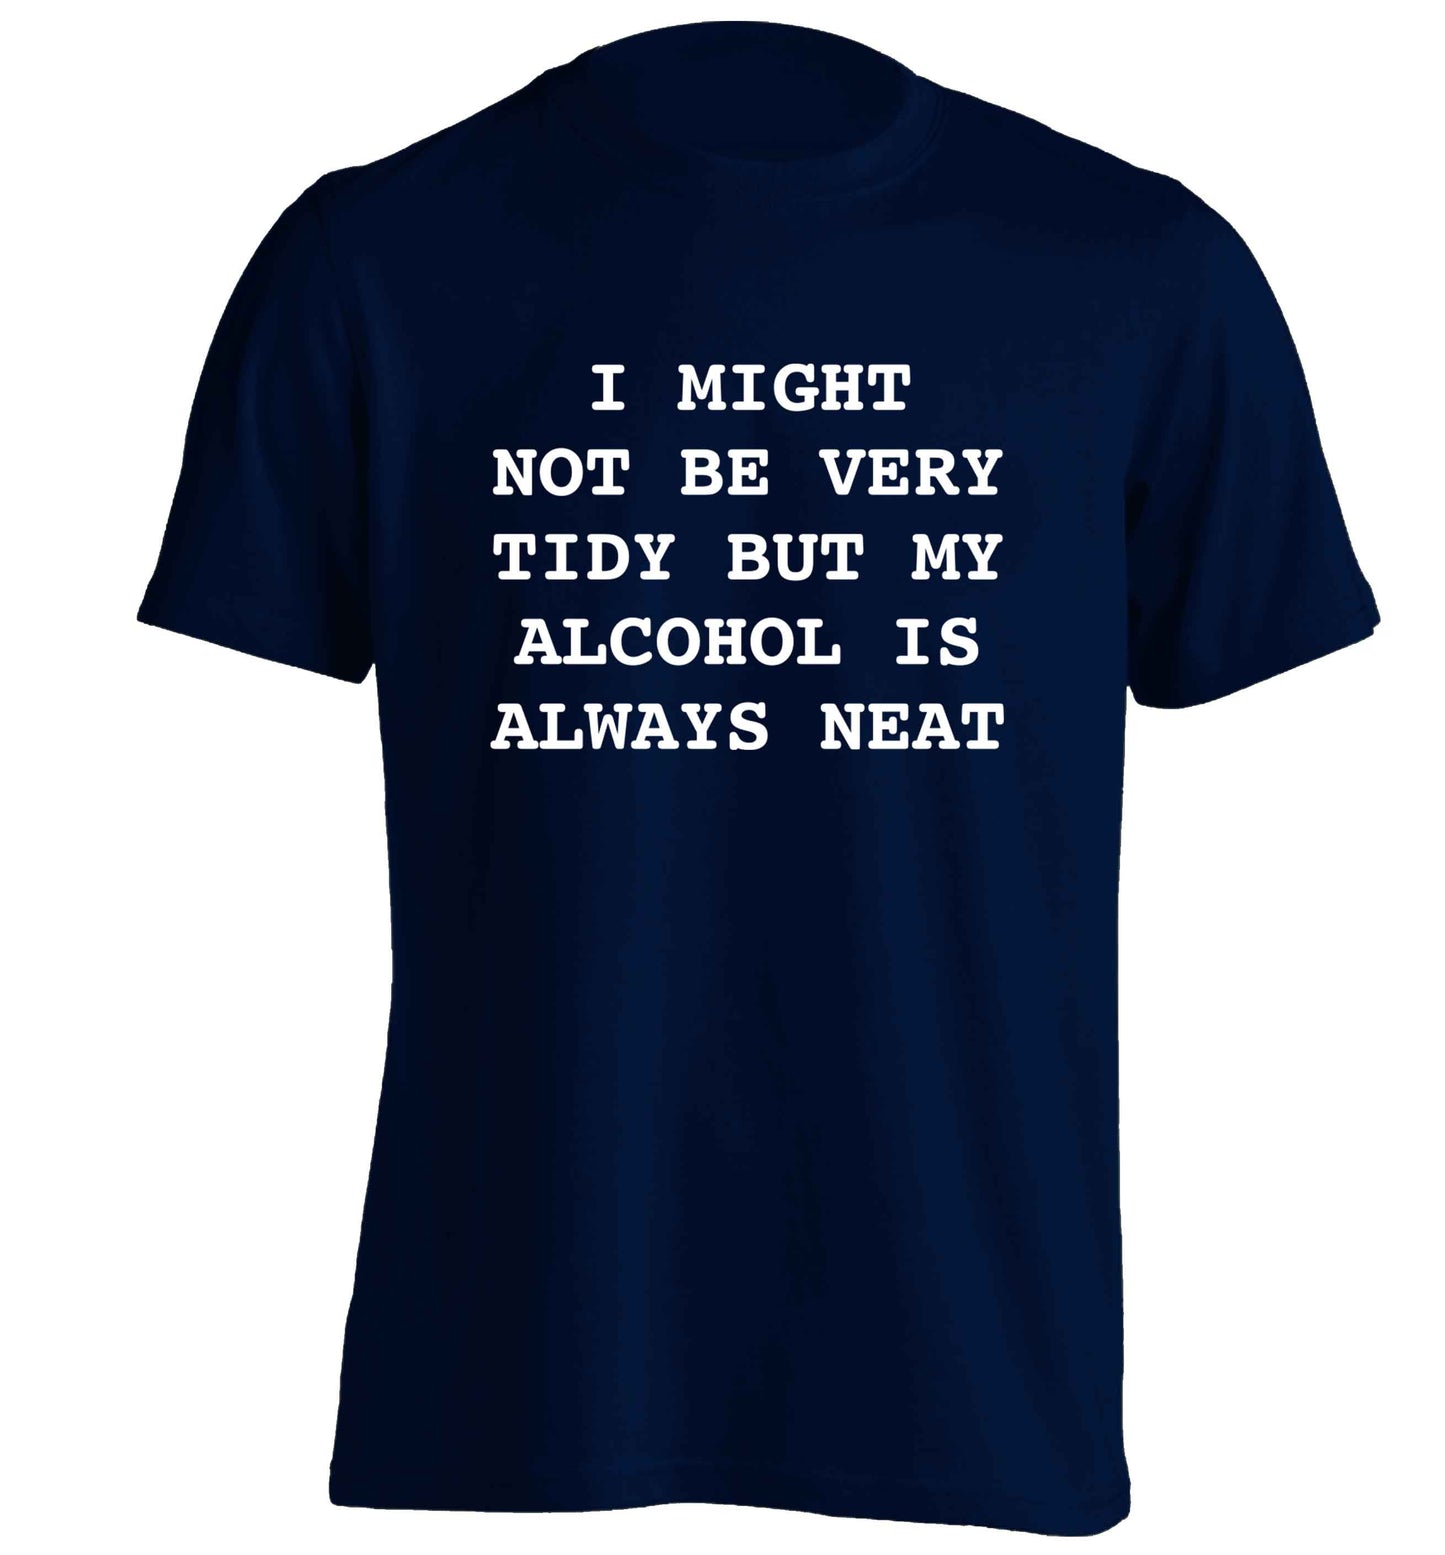 I might not be tidy but my alcohol is always neat adults unisex navy Tshirt 2XL